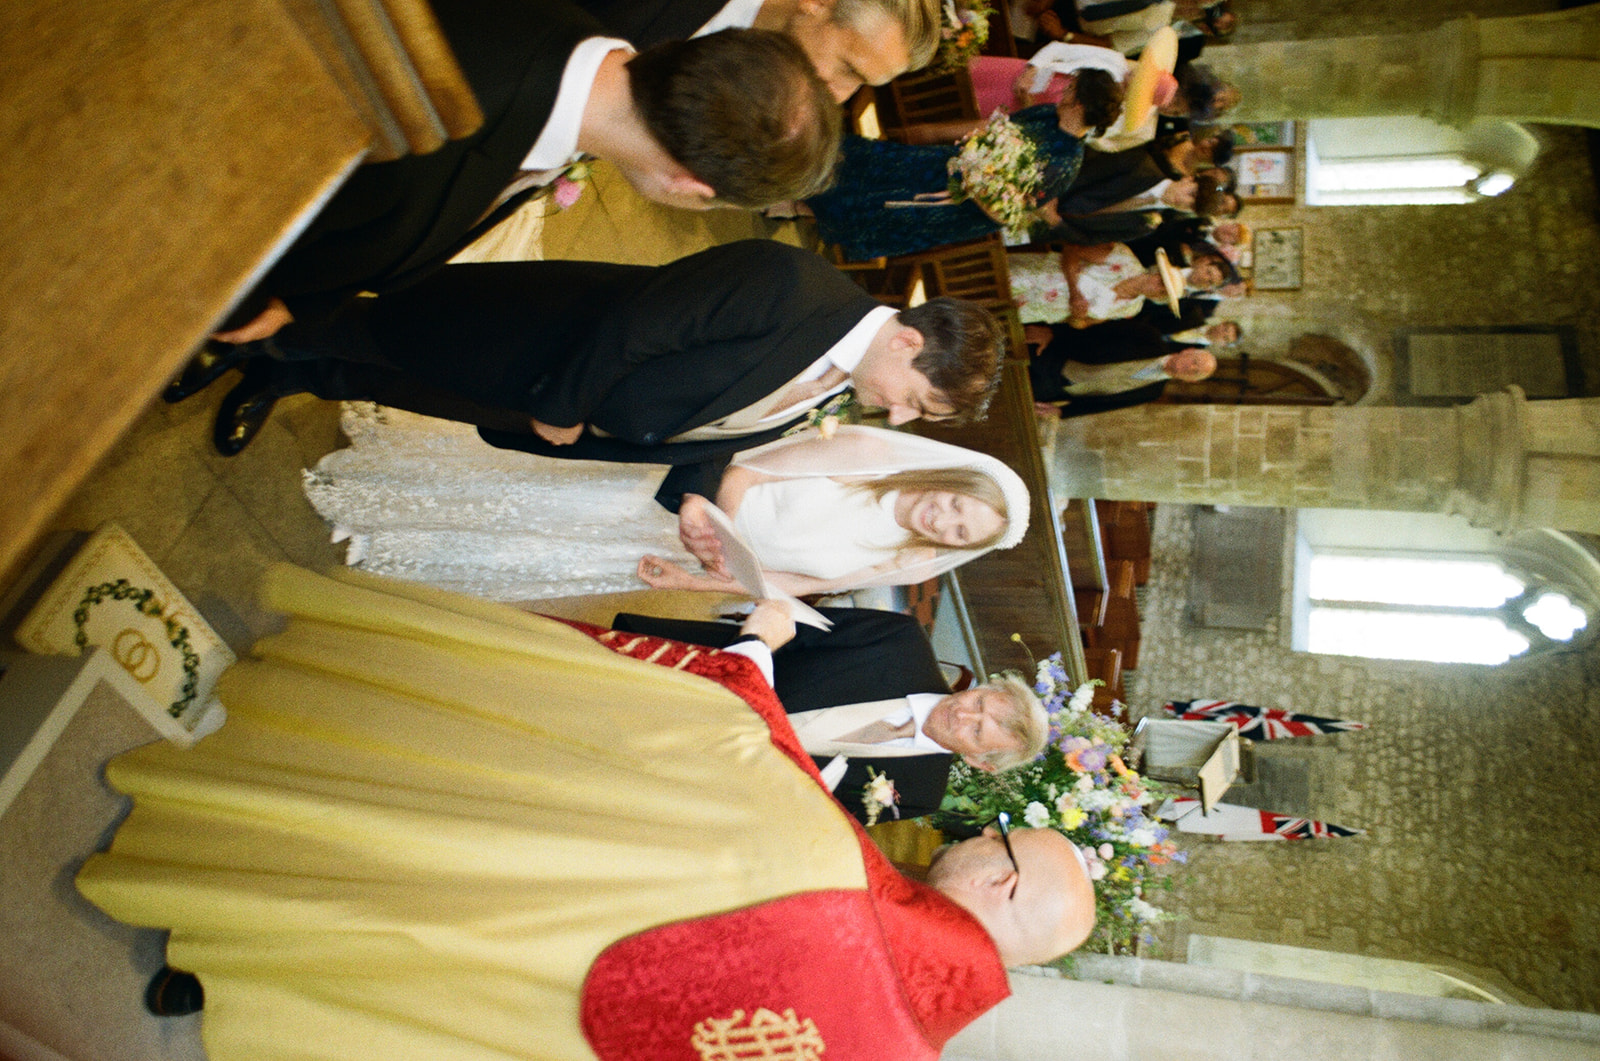 Vows being said at traditional church wedding